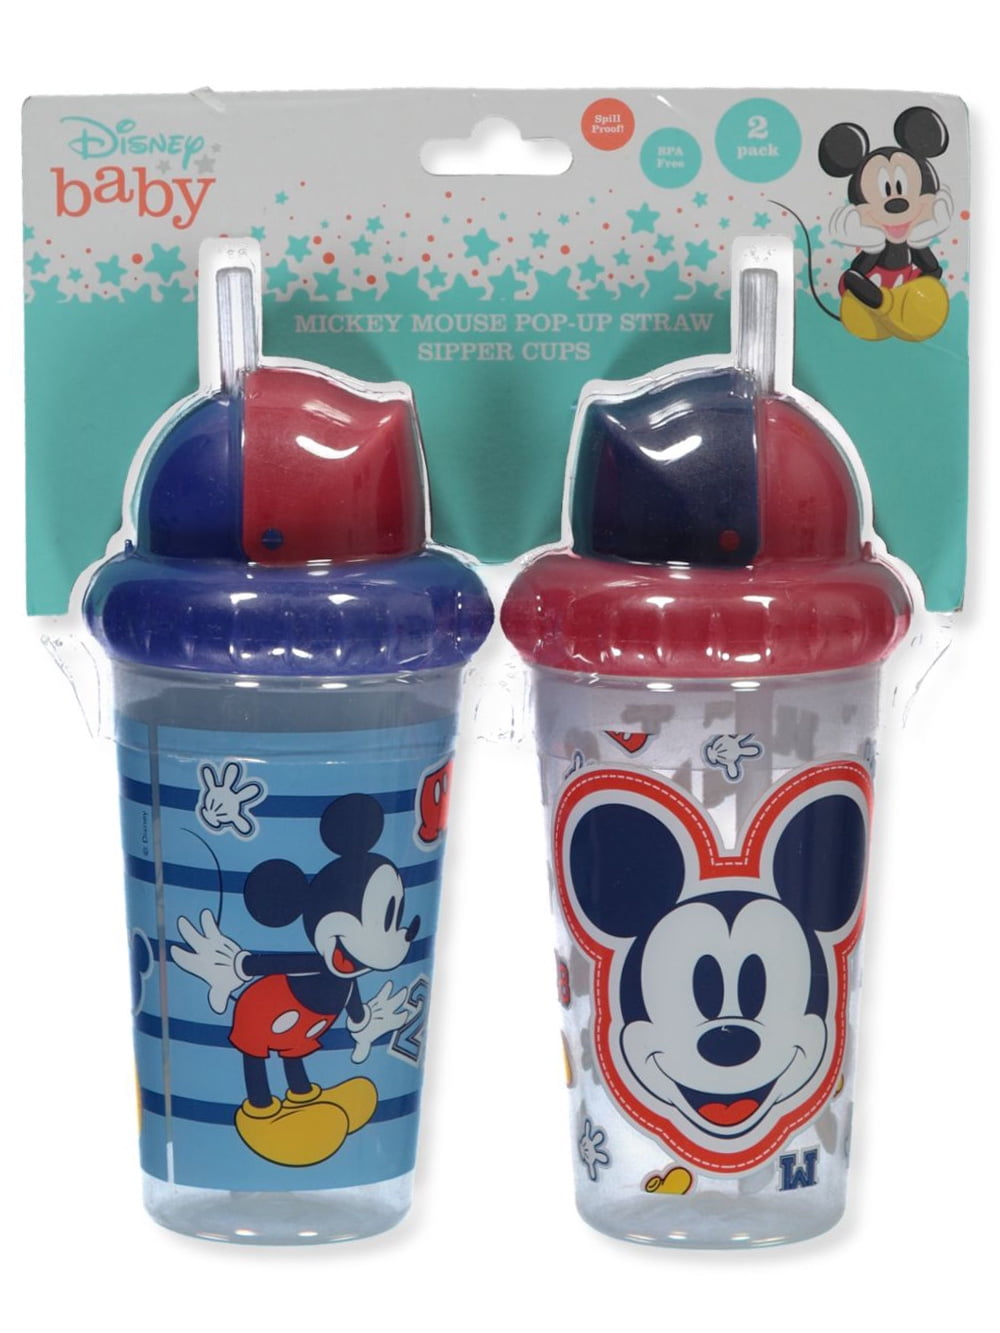 Disney Baby Girls' Mickey Mouse 2-Pack Pop-Up Straw Sipper Cups - Blue/Multi